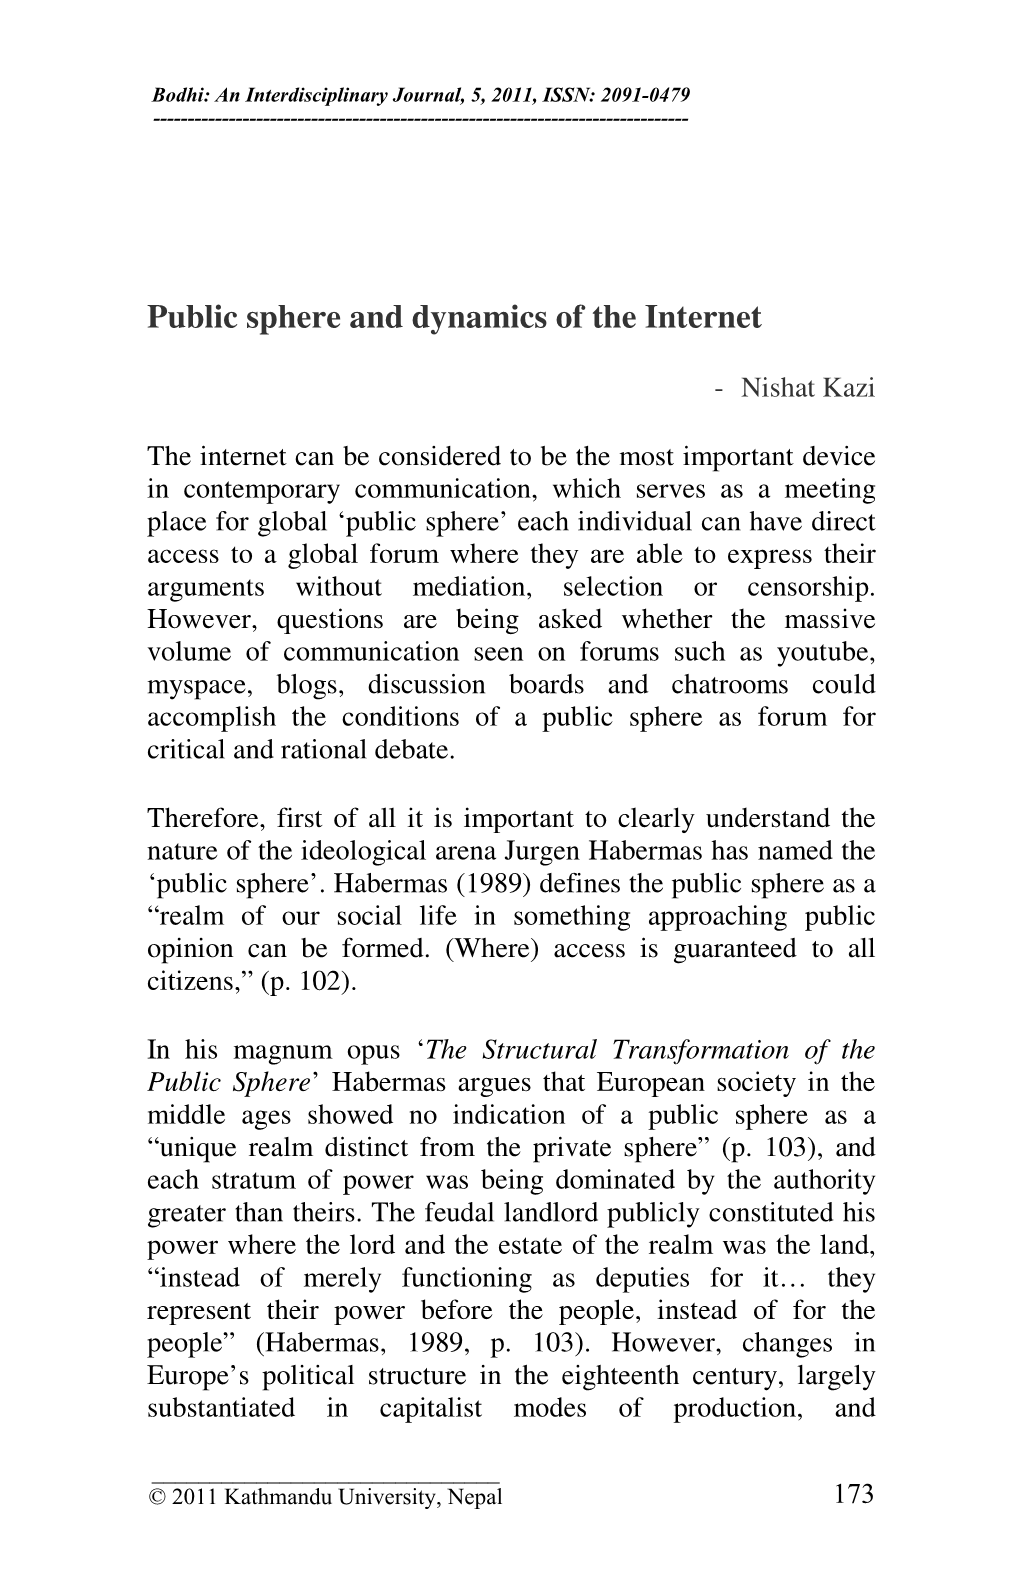 Public Sphere and Dynamics of the Internet